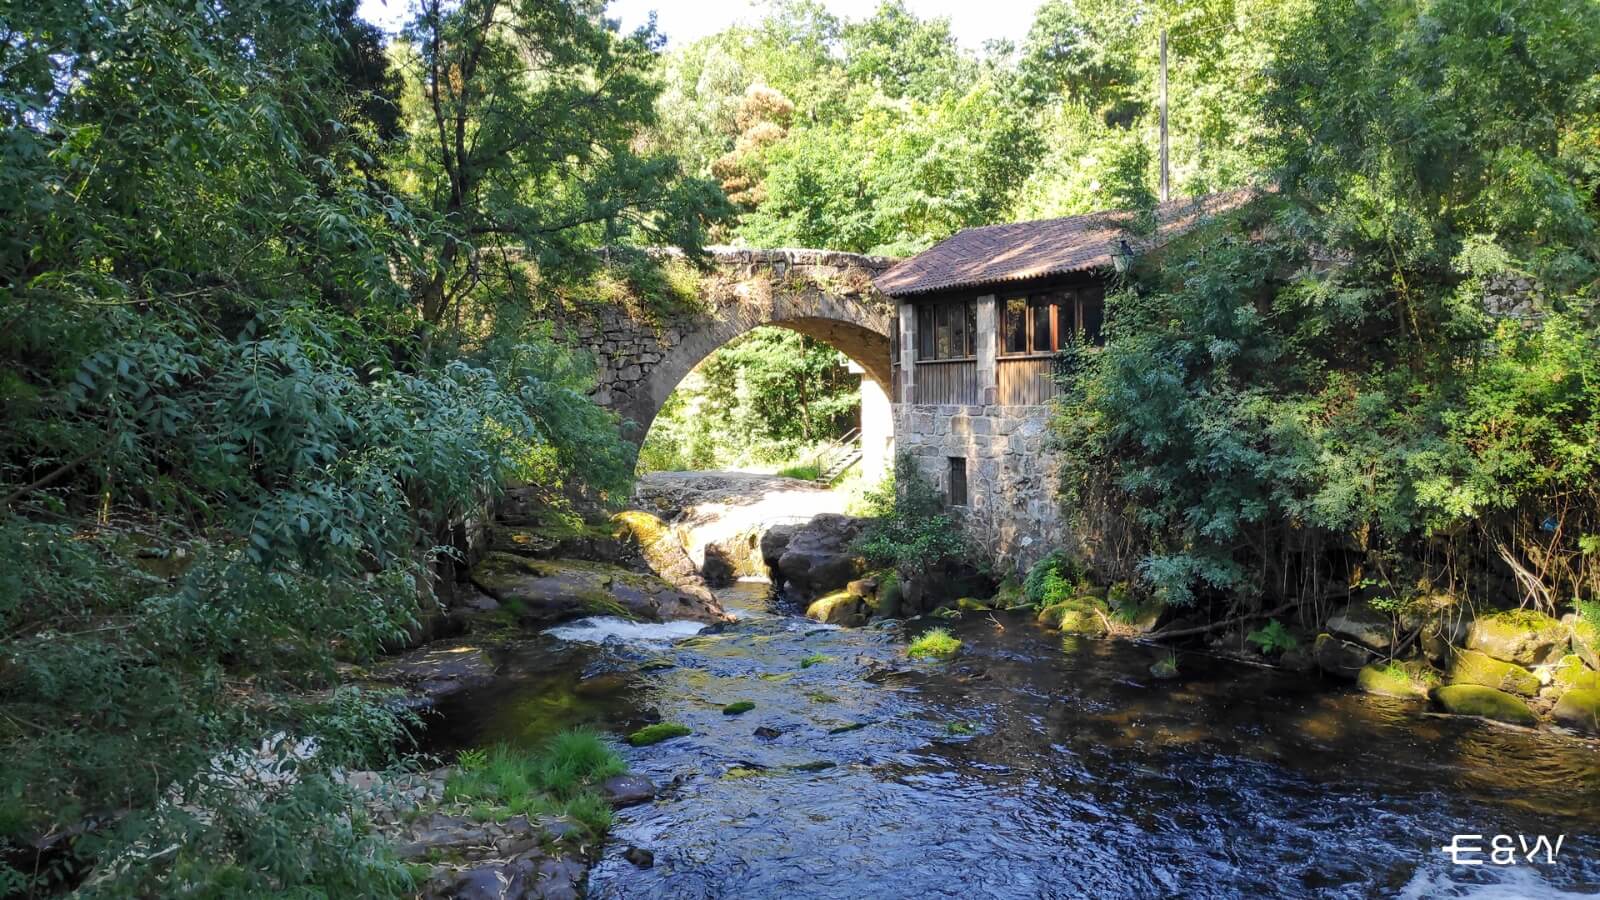 The 8 best places to visit in Galicia - 5. Arbo